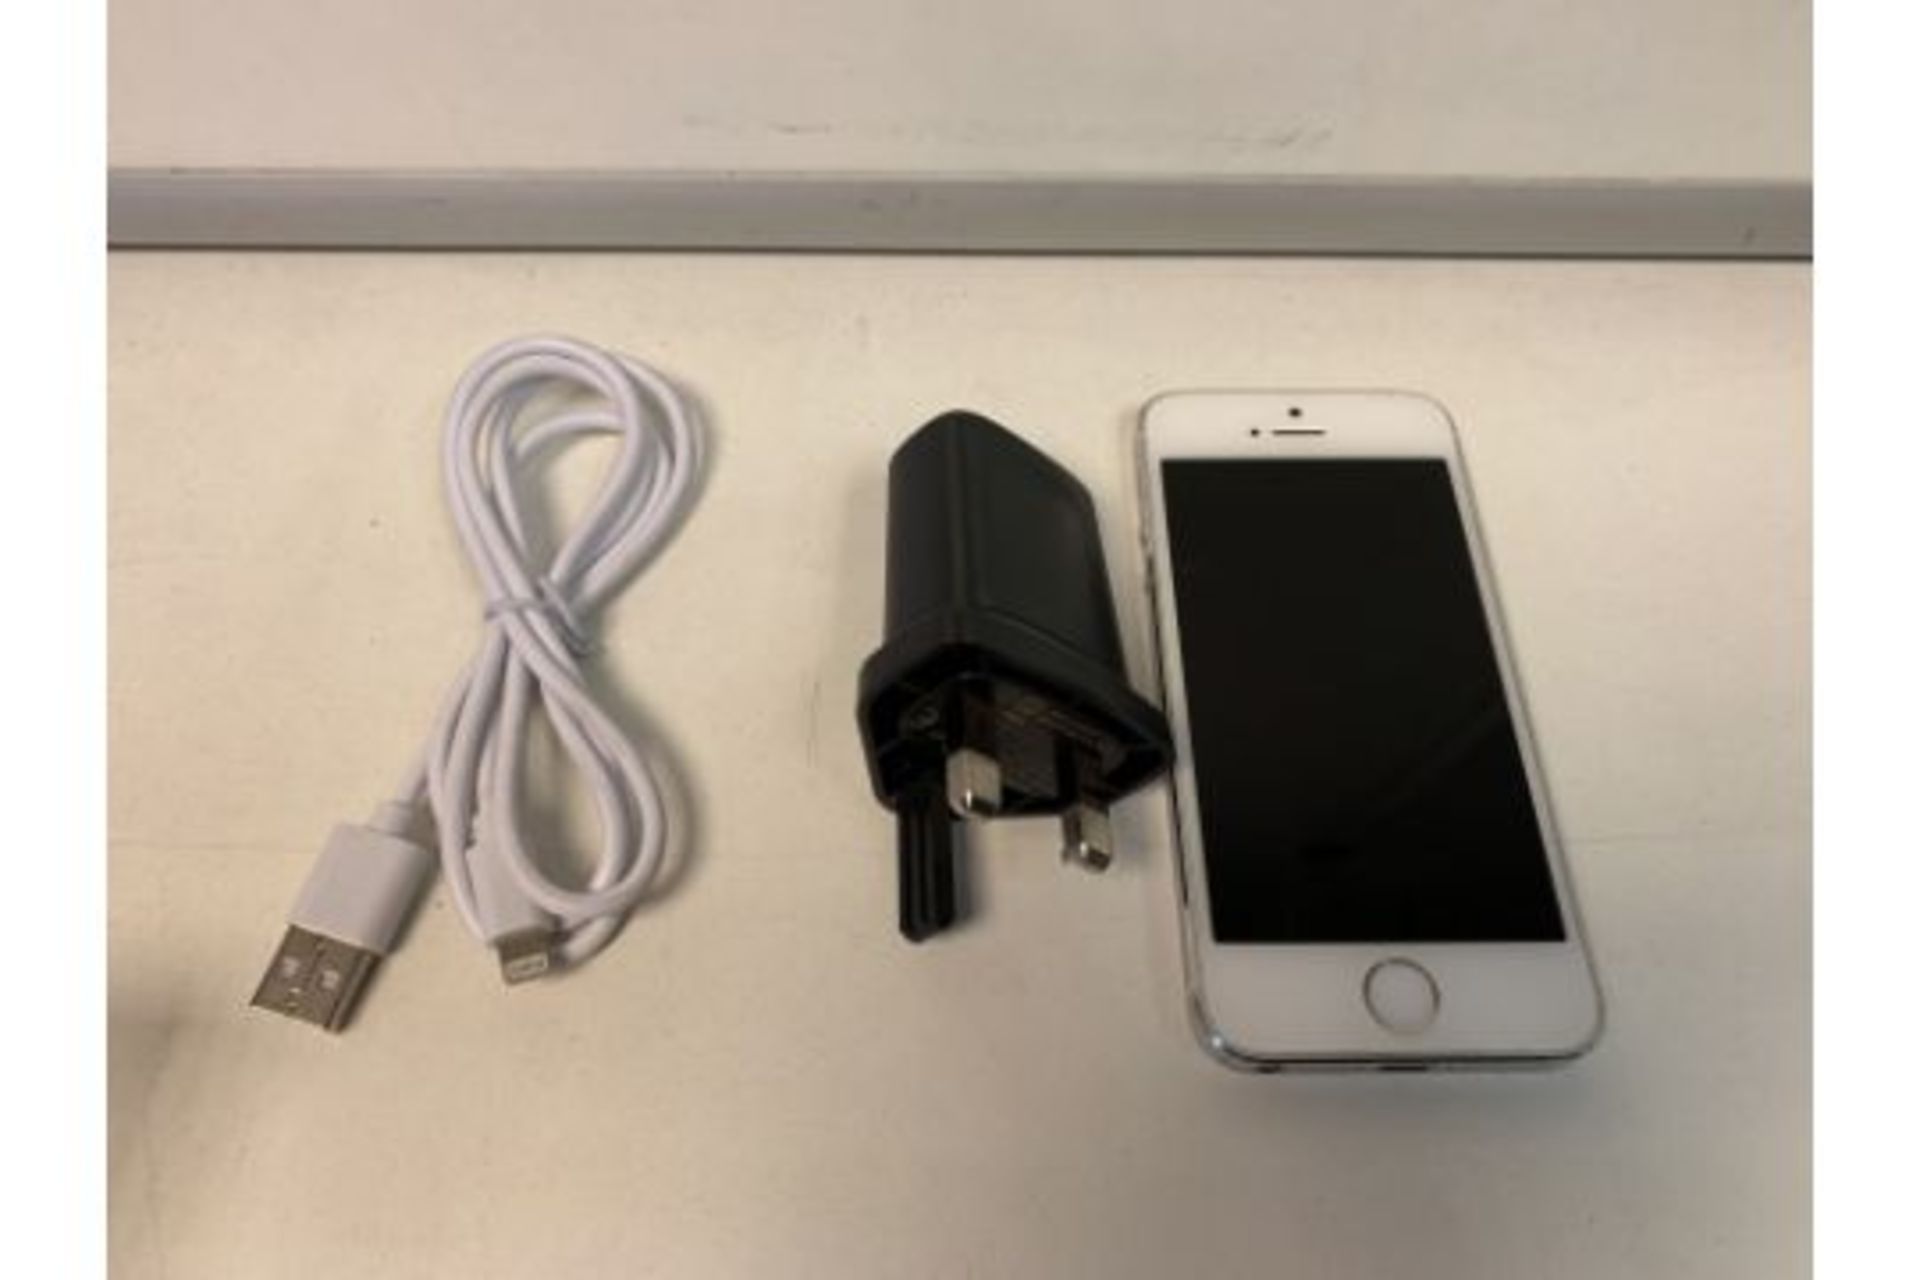 APPLE IPHONE, 16GB STORAGE WITH CHARGER (45)